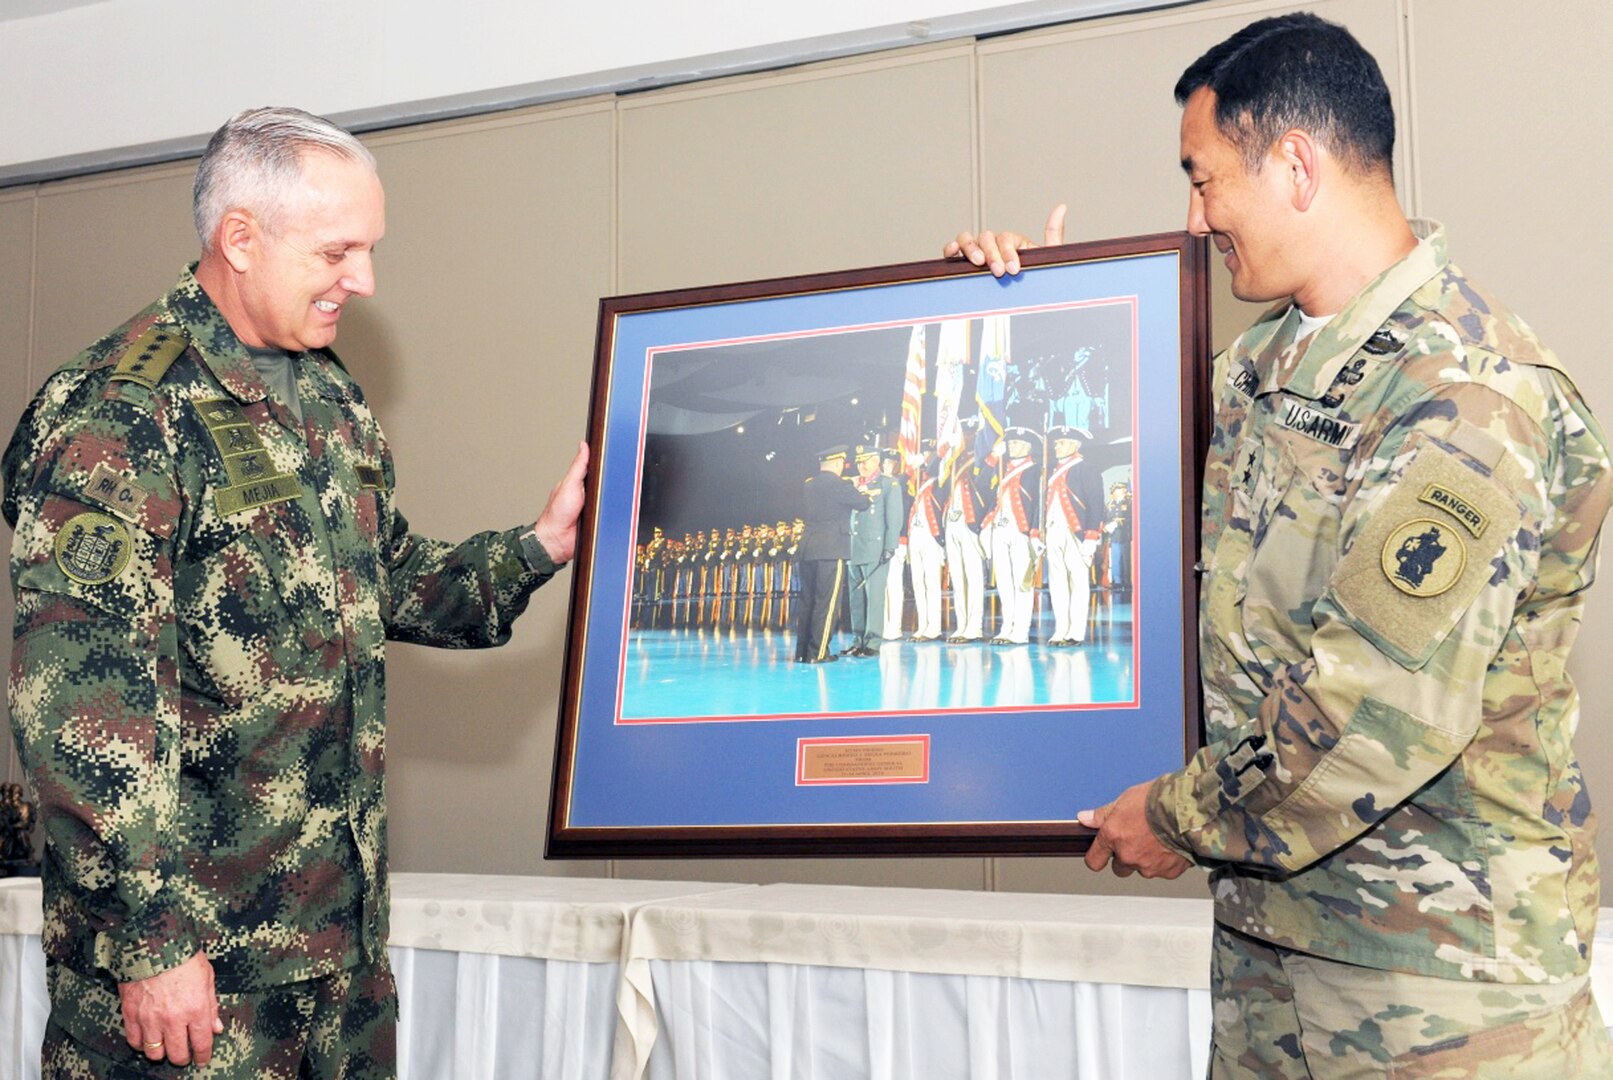 Maj. Gen. K.K. Chinn (right), U.S. Army South commander, presents a framed photo to Gen. Alberto Jose Mejia, Colombian army commander, during the closing ceremony of the 2016 U.S.-Colombia
Bilateral Army Staff Talks Executive Meeting in Bogota, Colombia April 14. The framed photo is significant since it was taken when Mejia was in Washington, D.C., last February for the Conference of the American Armies transfer ceremony where U.S. Army Chief of Staff Gen. Mark A. Milley presented him with the Legion of Merit.